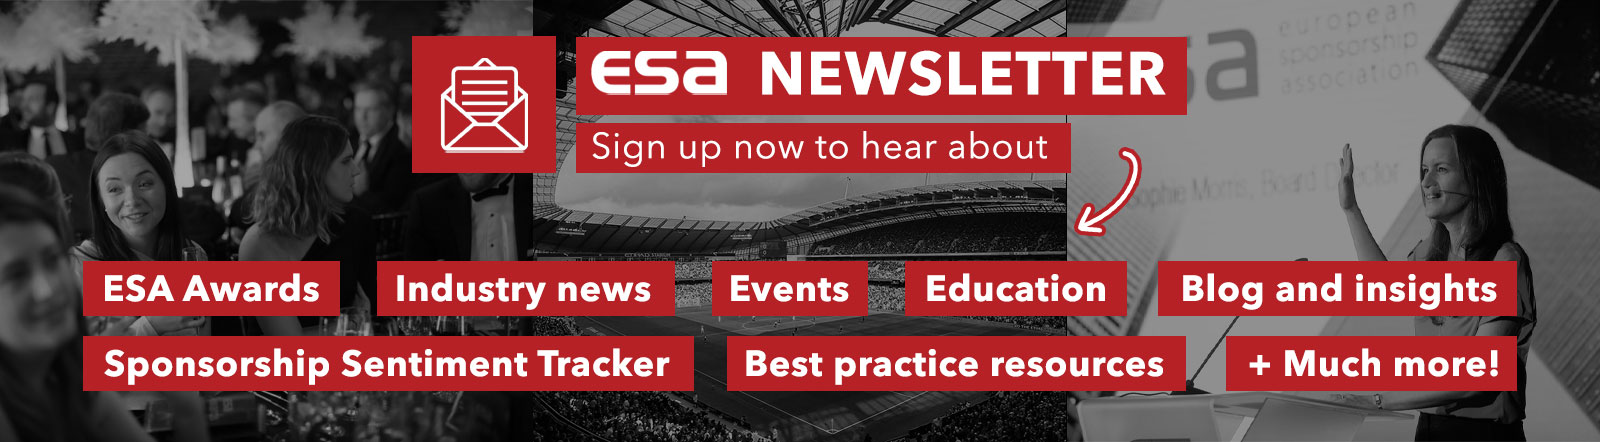 Esa Welcome To The European Sponsorship Association Promoting Best Practice And Raising Industry Standards In Sponsorship Activities